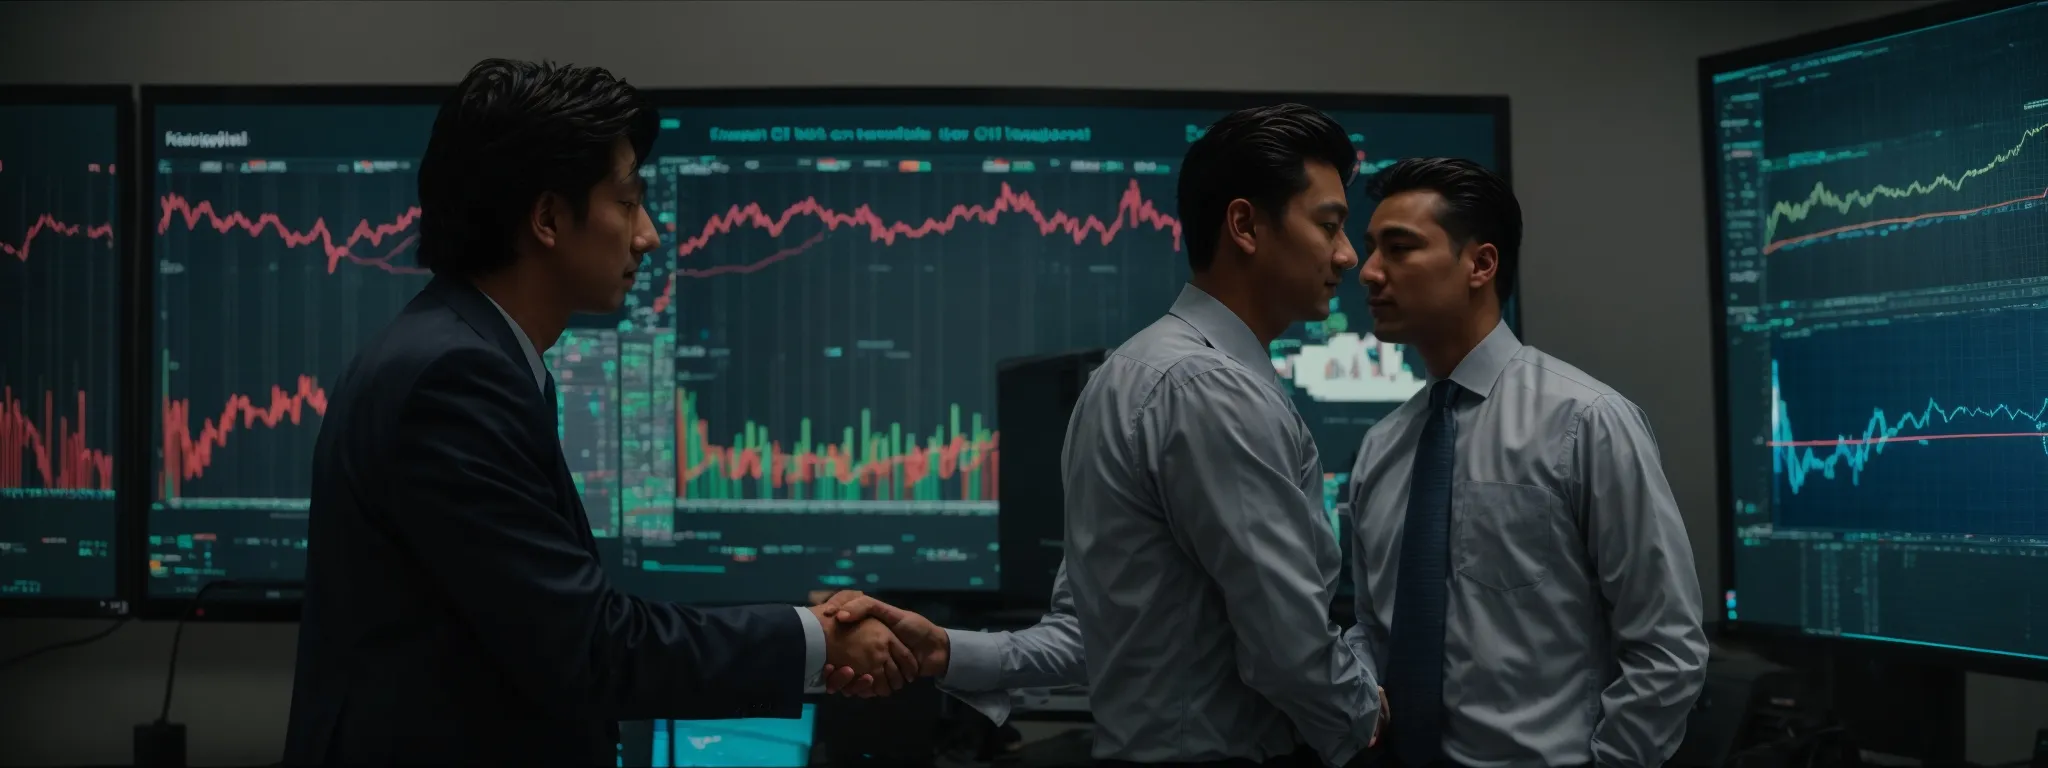 two corporate representatives shaking hands in front of a large computer monitor displaying bright, ascending graphs.